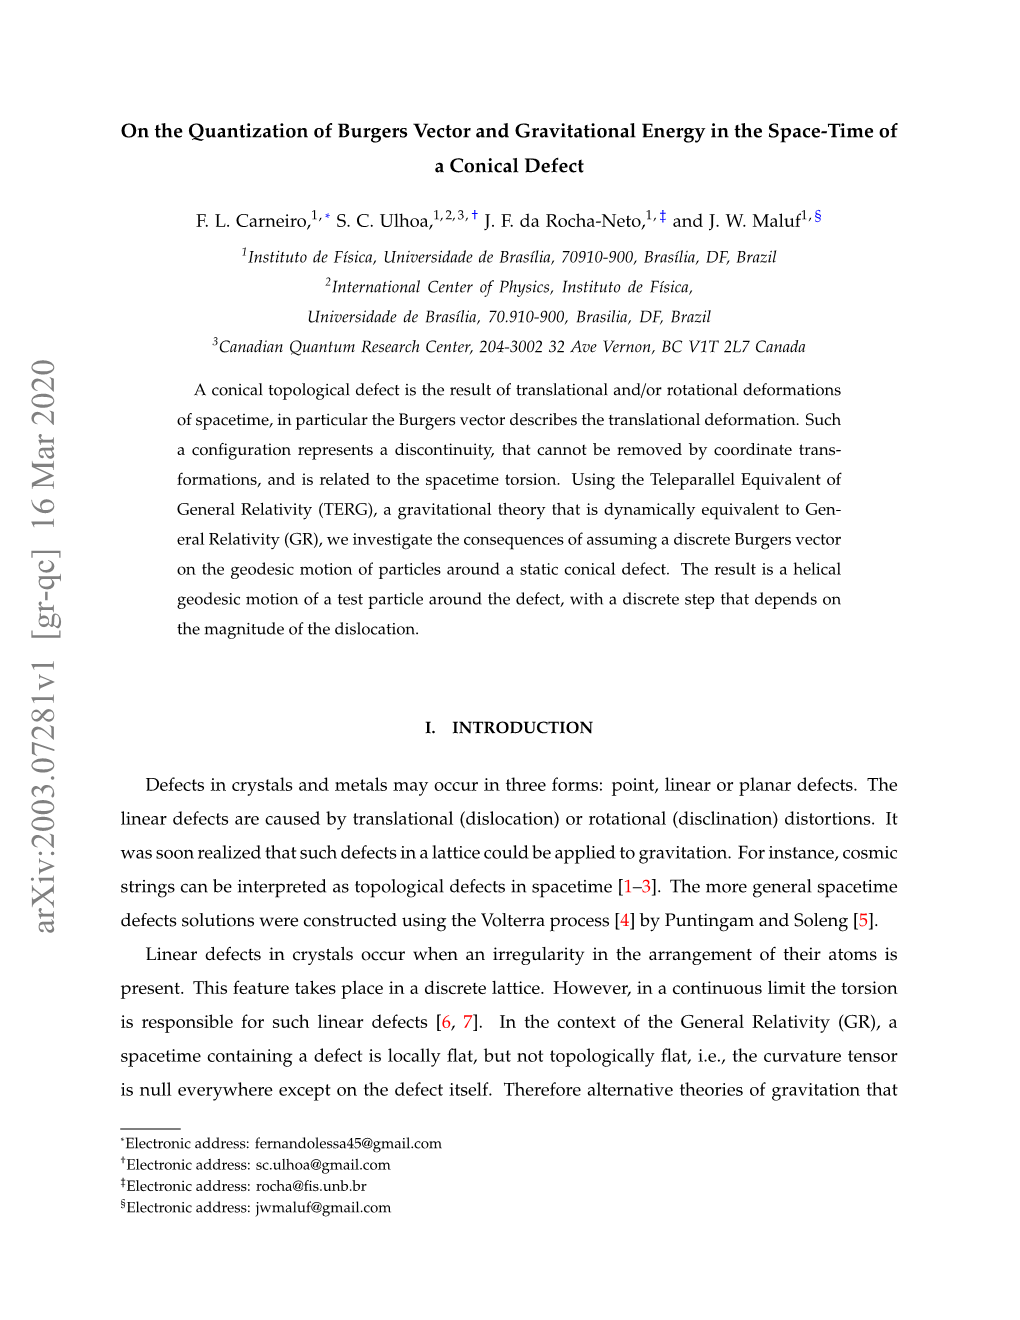 On the Quantization of Burgers Vector and Gravitational Energy in the Space-Time of a Conical Defect